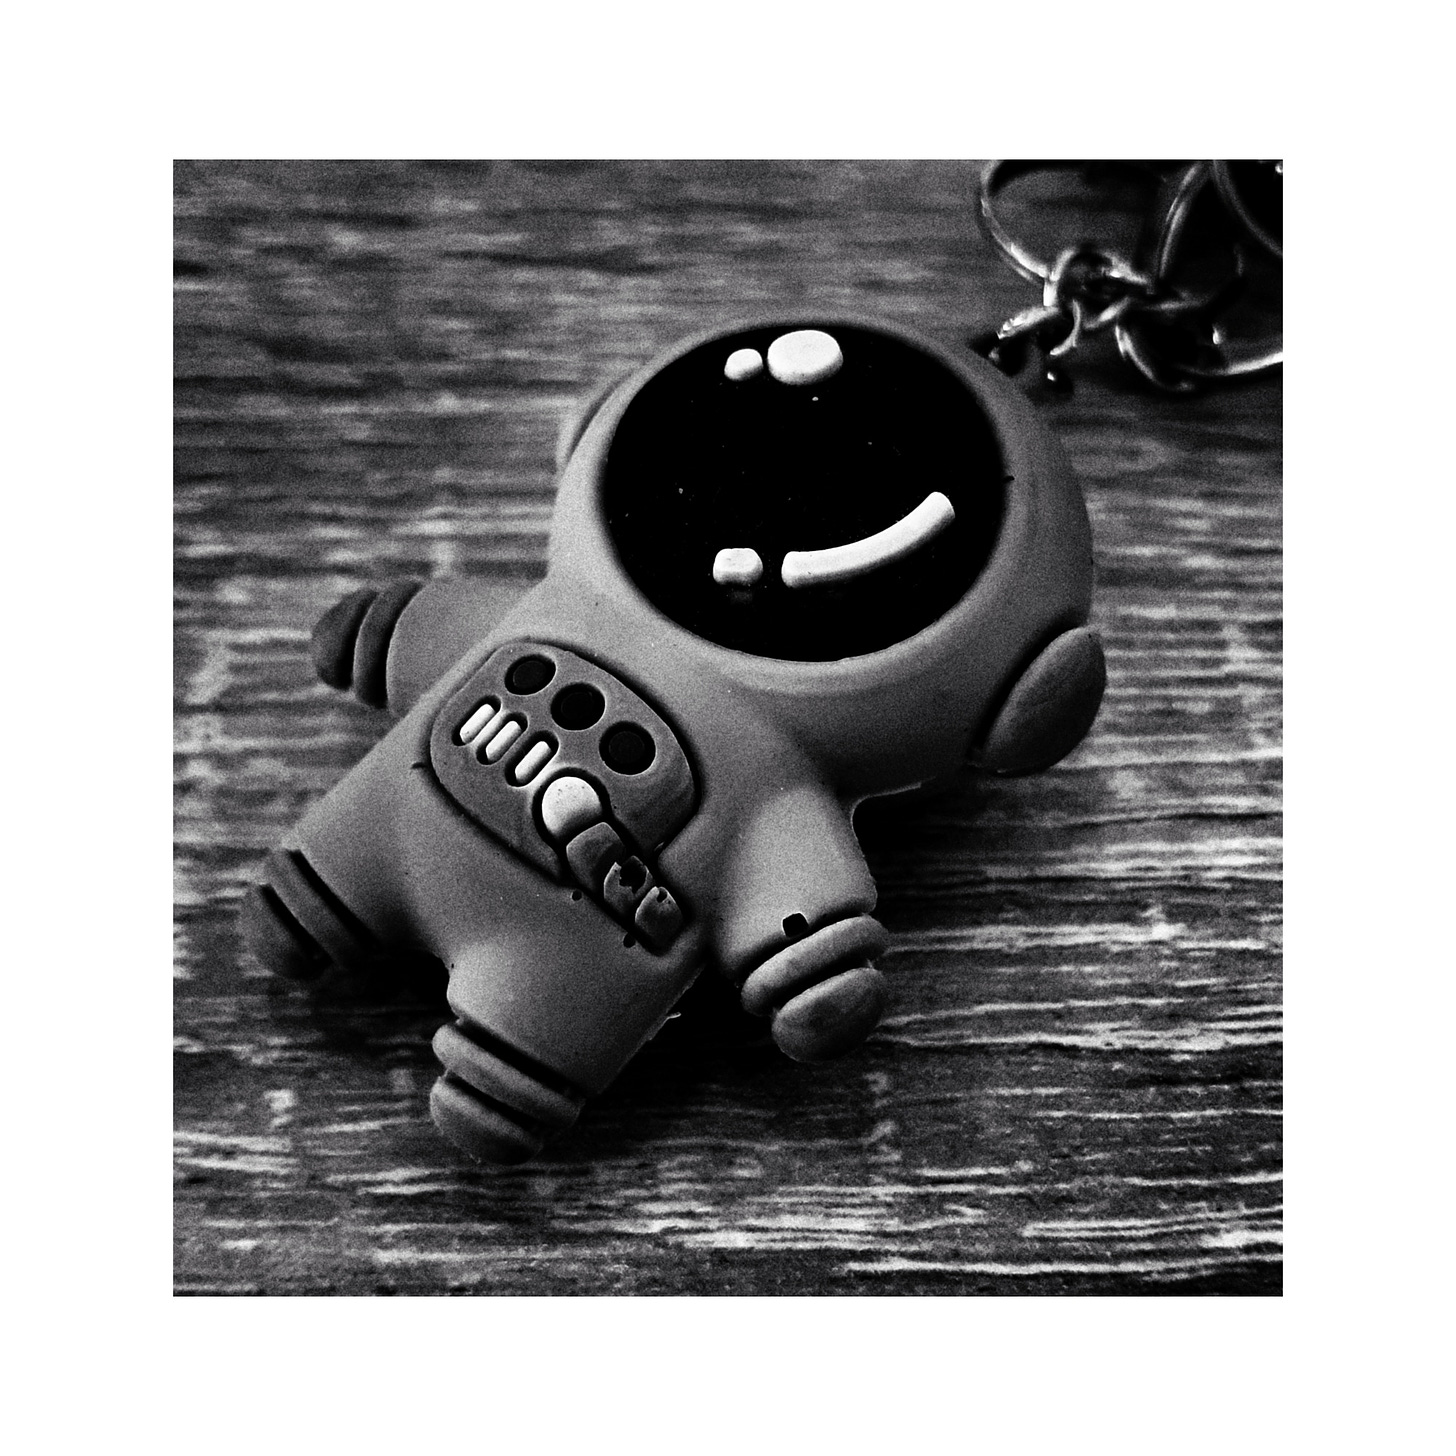 An image of a astronaut keyring placed on a table.